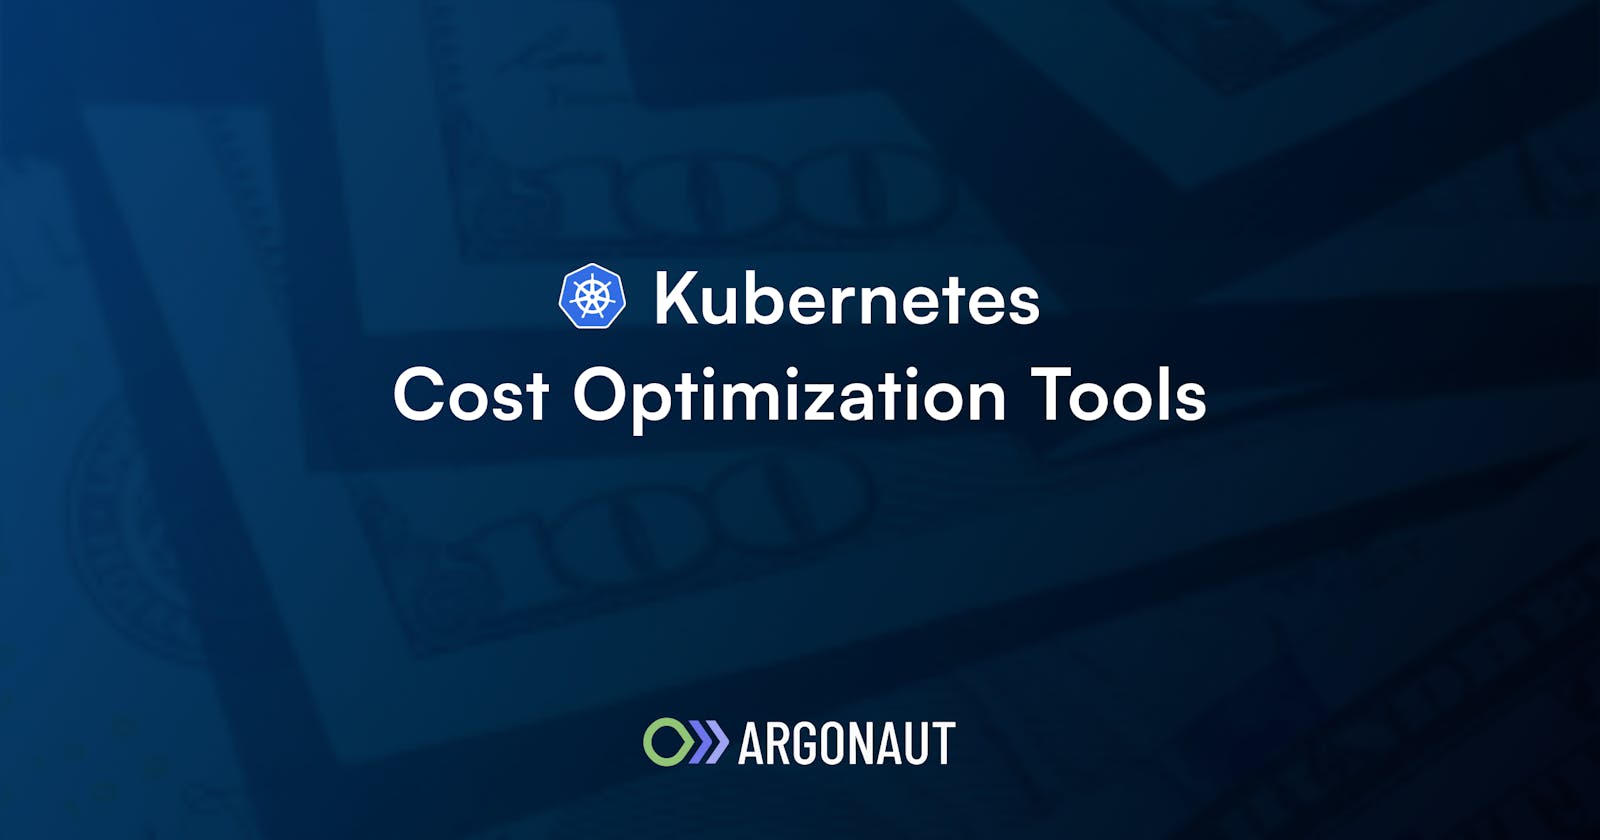 7 Kubernetes Cost Optimization Tools To Observe and Save on Costs